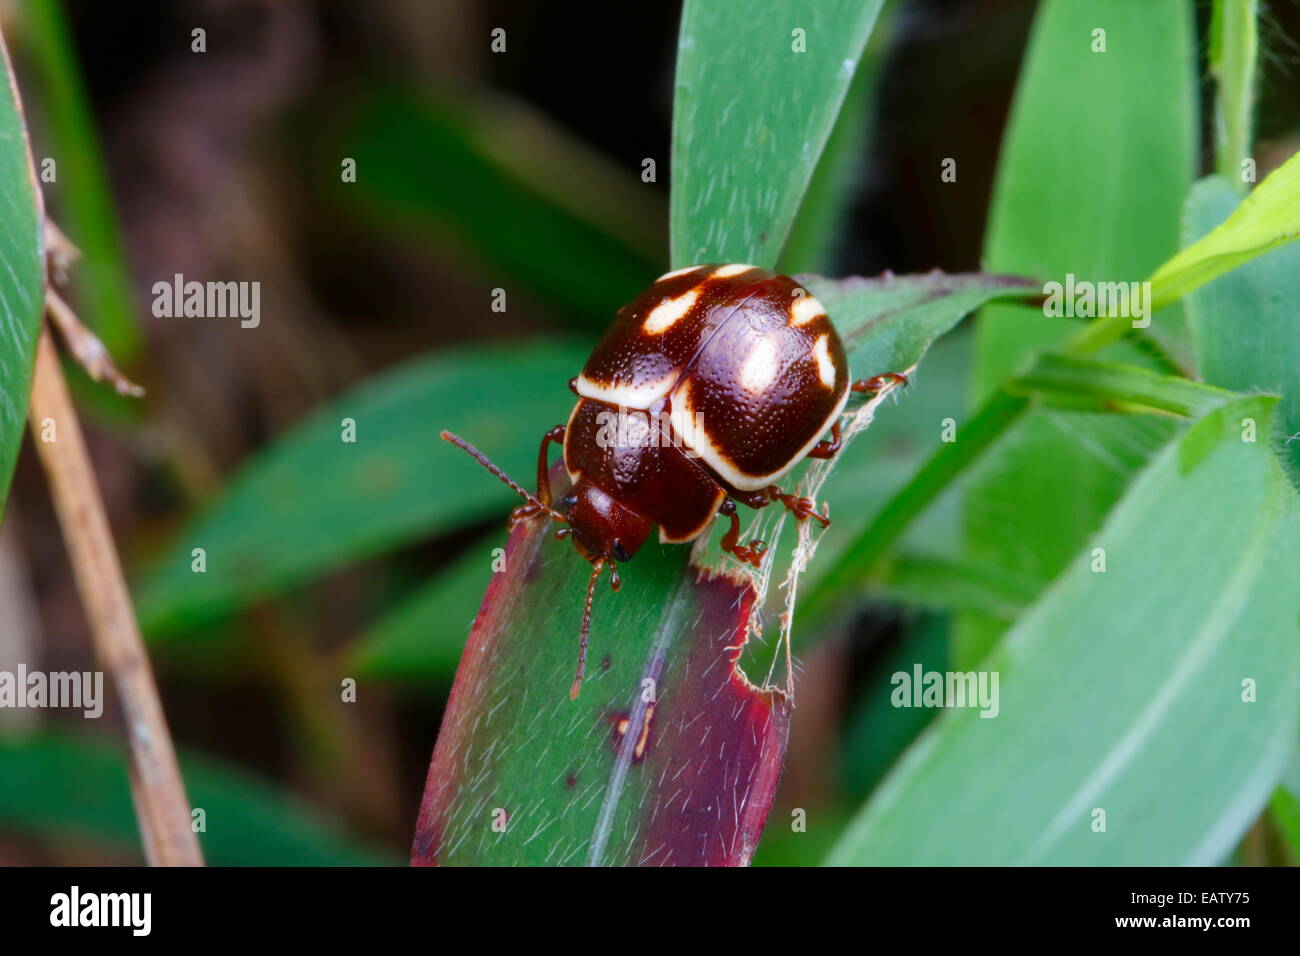 A brown and white leaf beetle, probably Chrysomelidae species, foraging on a leaf. Stock Photo